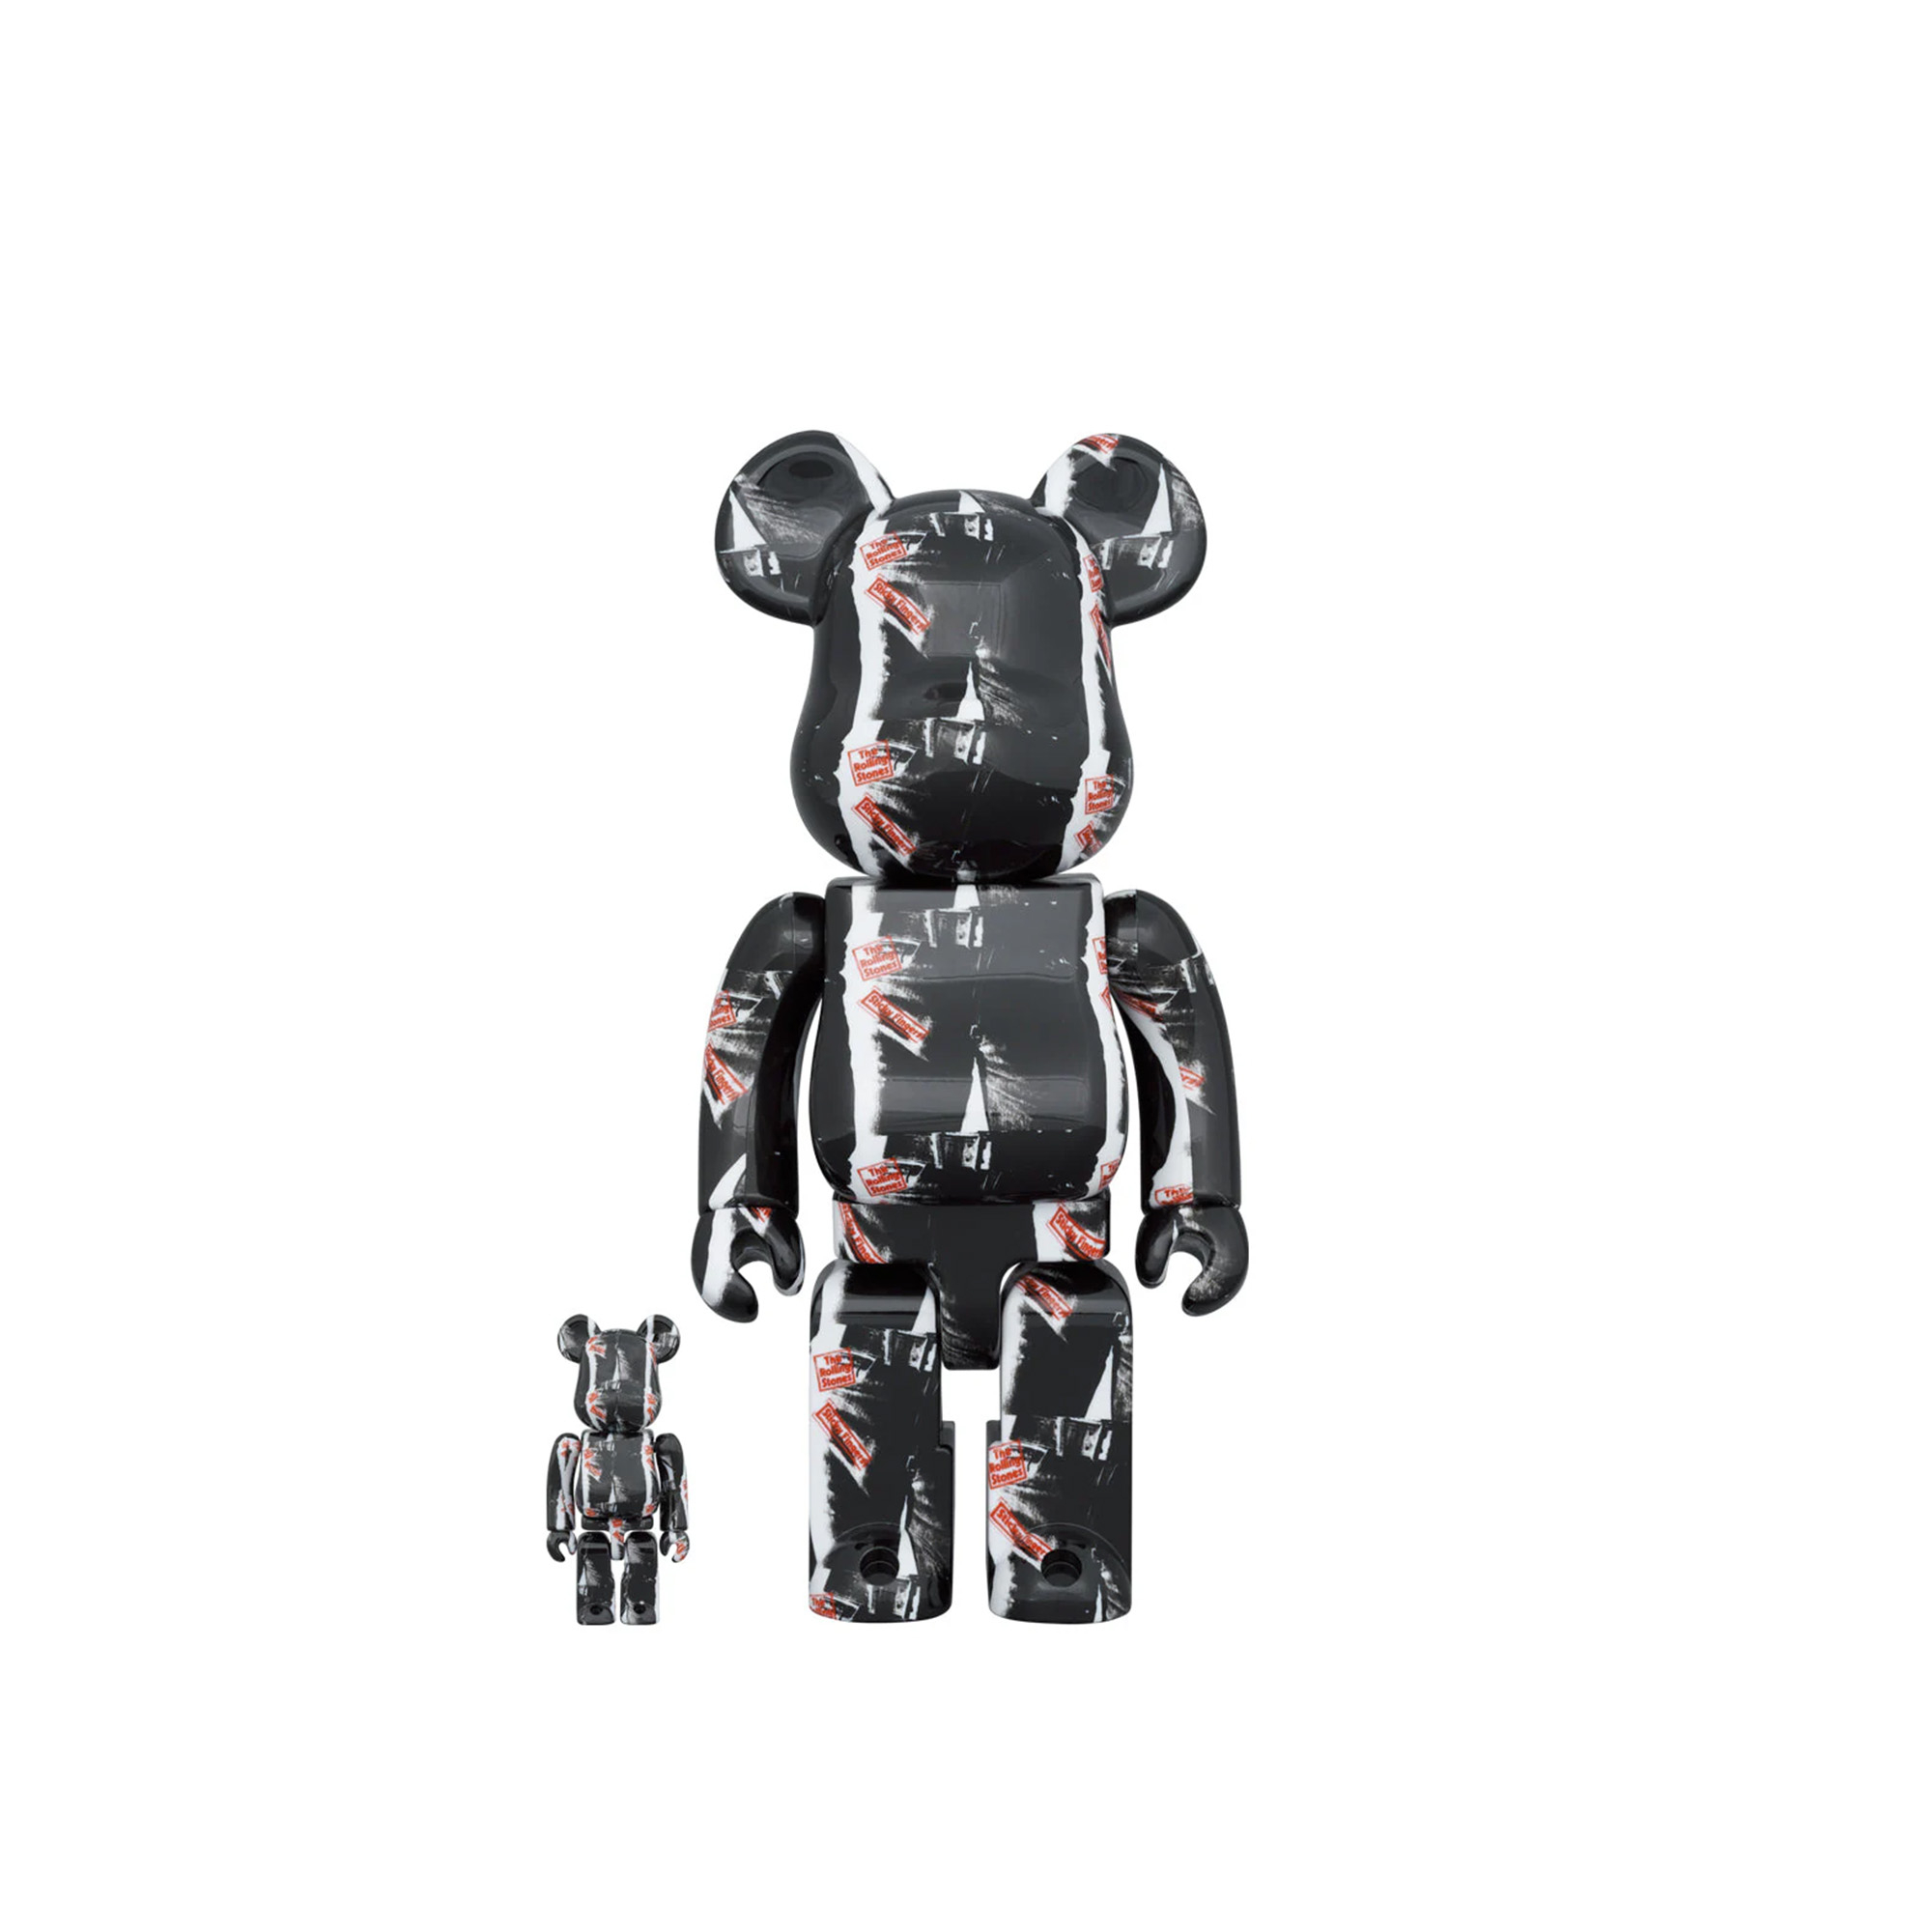 Buy BE@RBRICK Andy Warhol × The Rolling Stones Sticky Fingers 100% u0026 400%  from Medicom Toy | NO GA